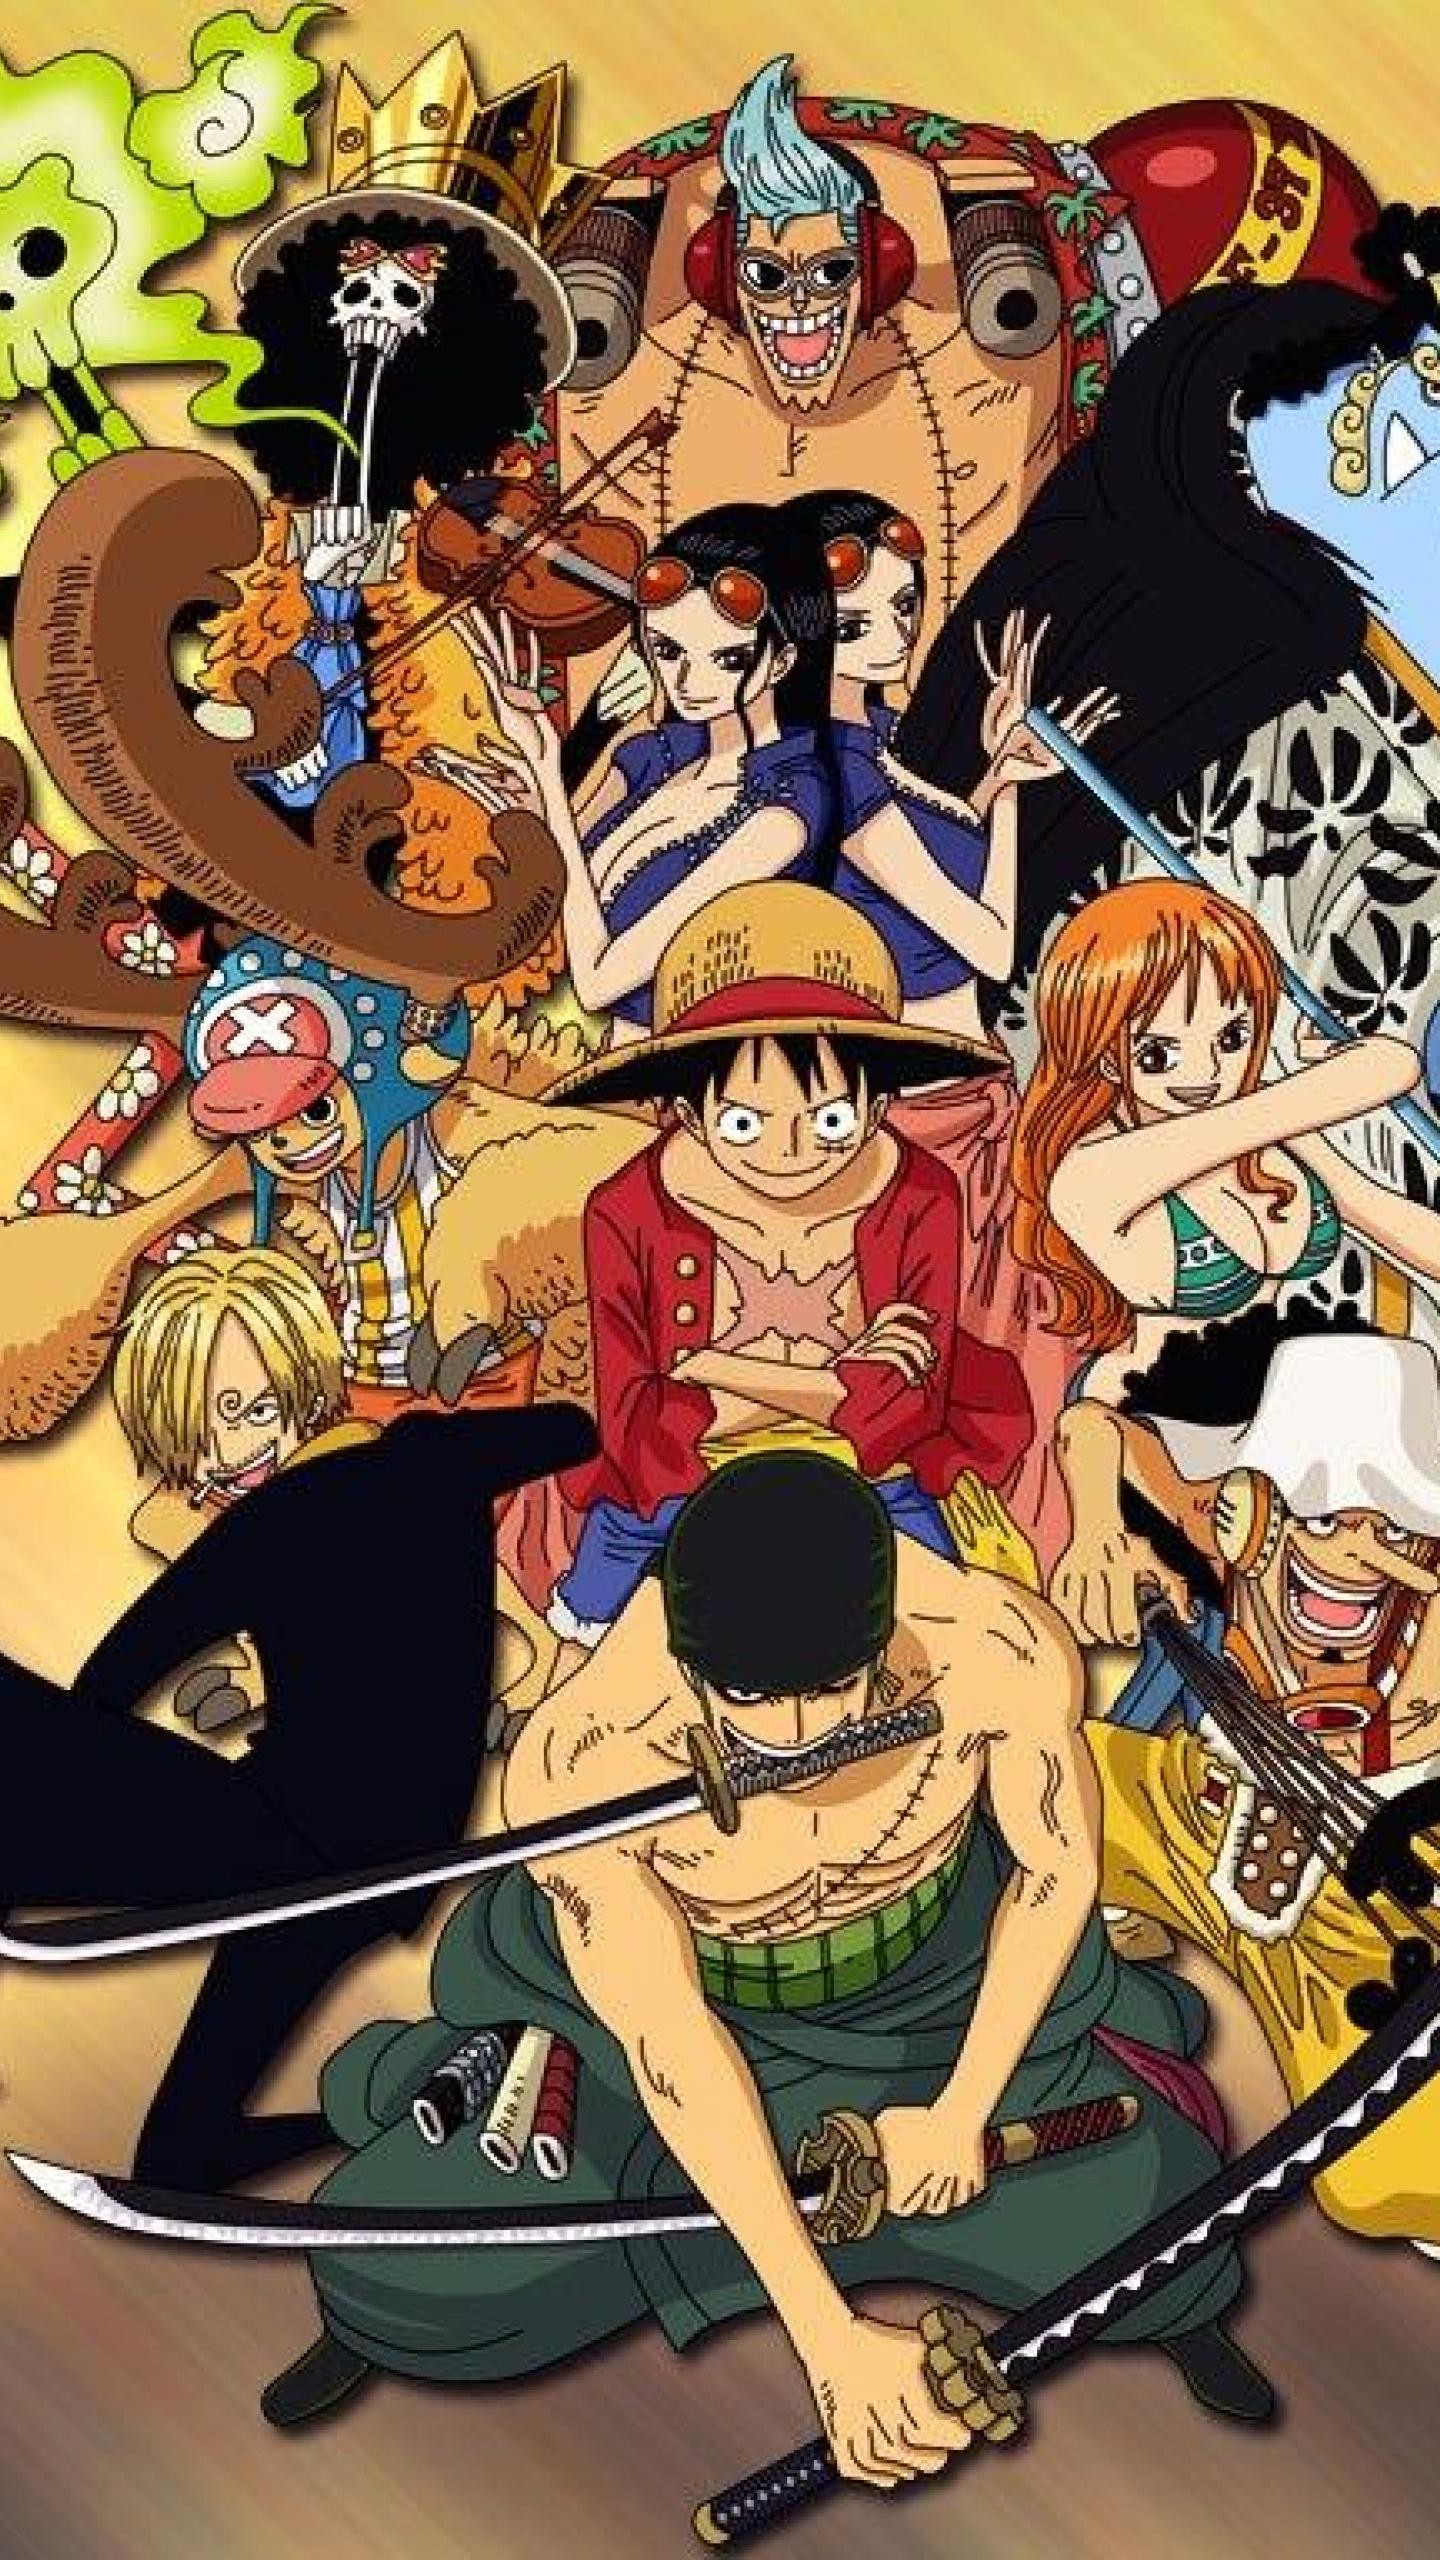 1440x2560 One Piece Mobile Wallpaper